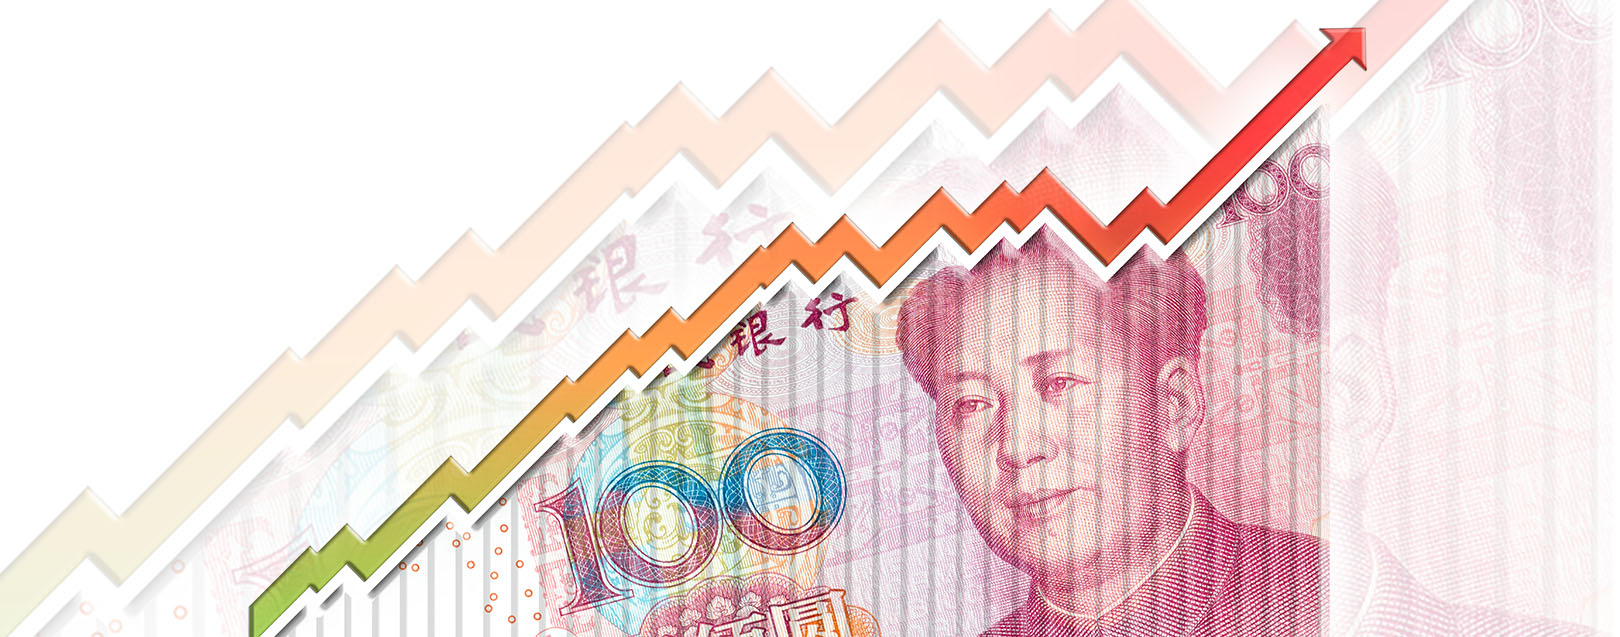 China's fiscal revenue grows 4.5% in 2016